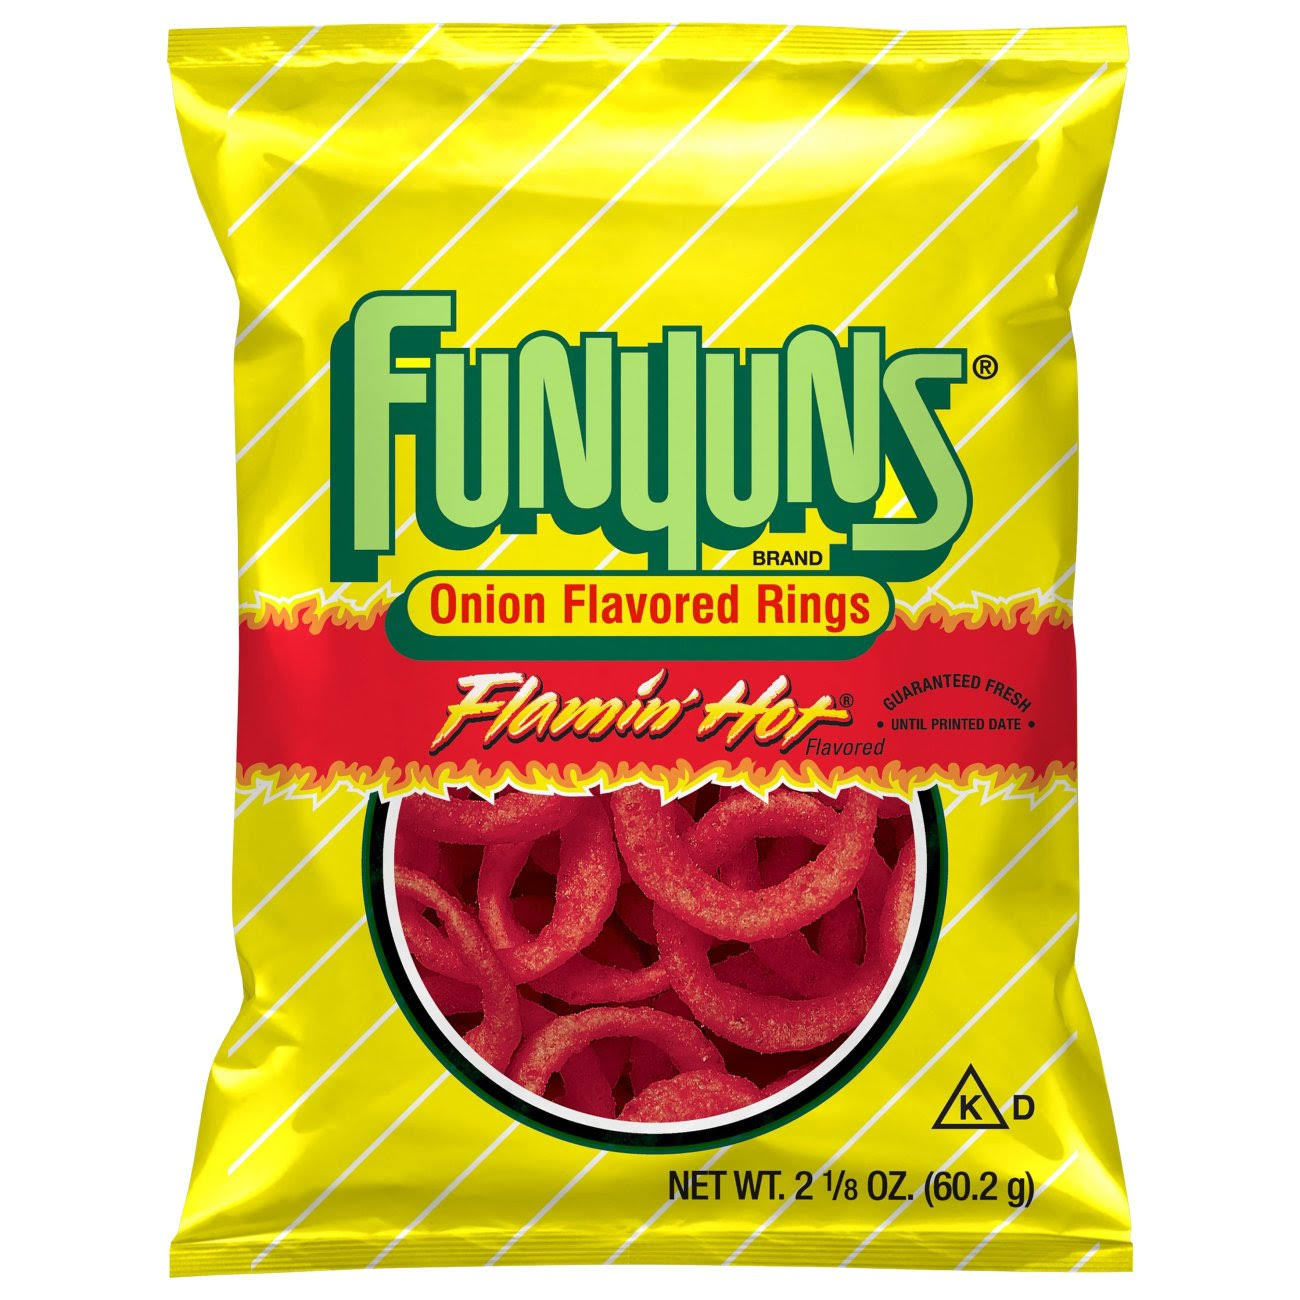 Funyuns Onion Flavored Rings, Flamin' Hot Flavored - 2.125 oz